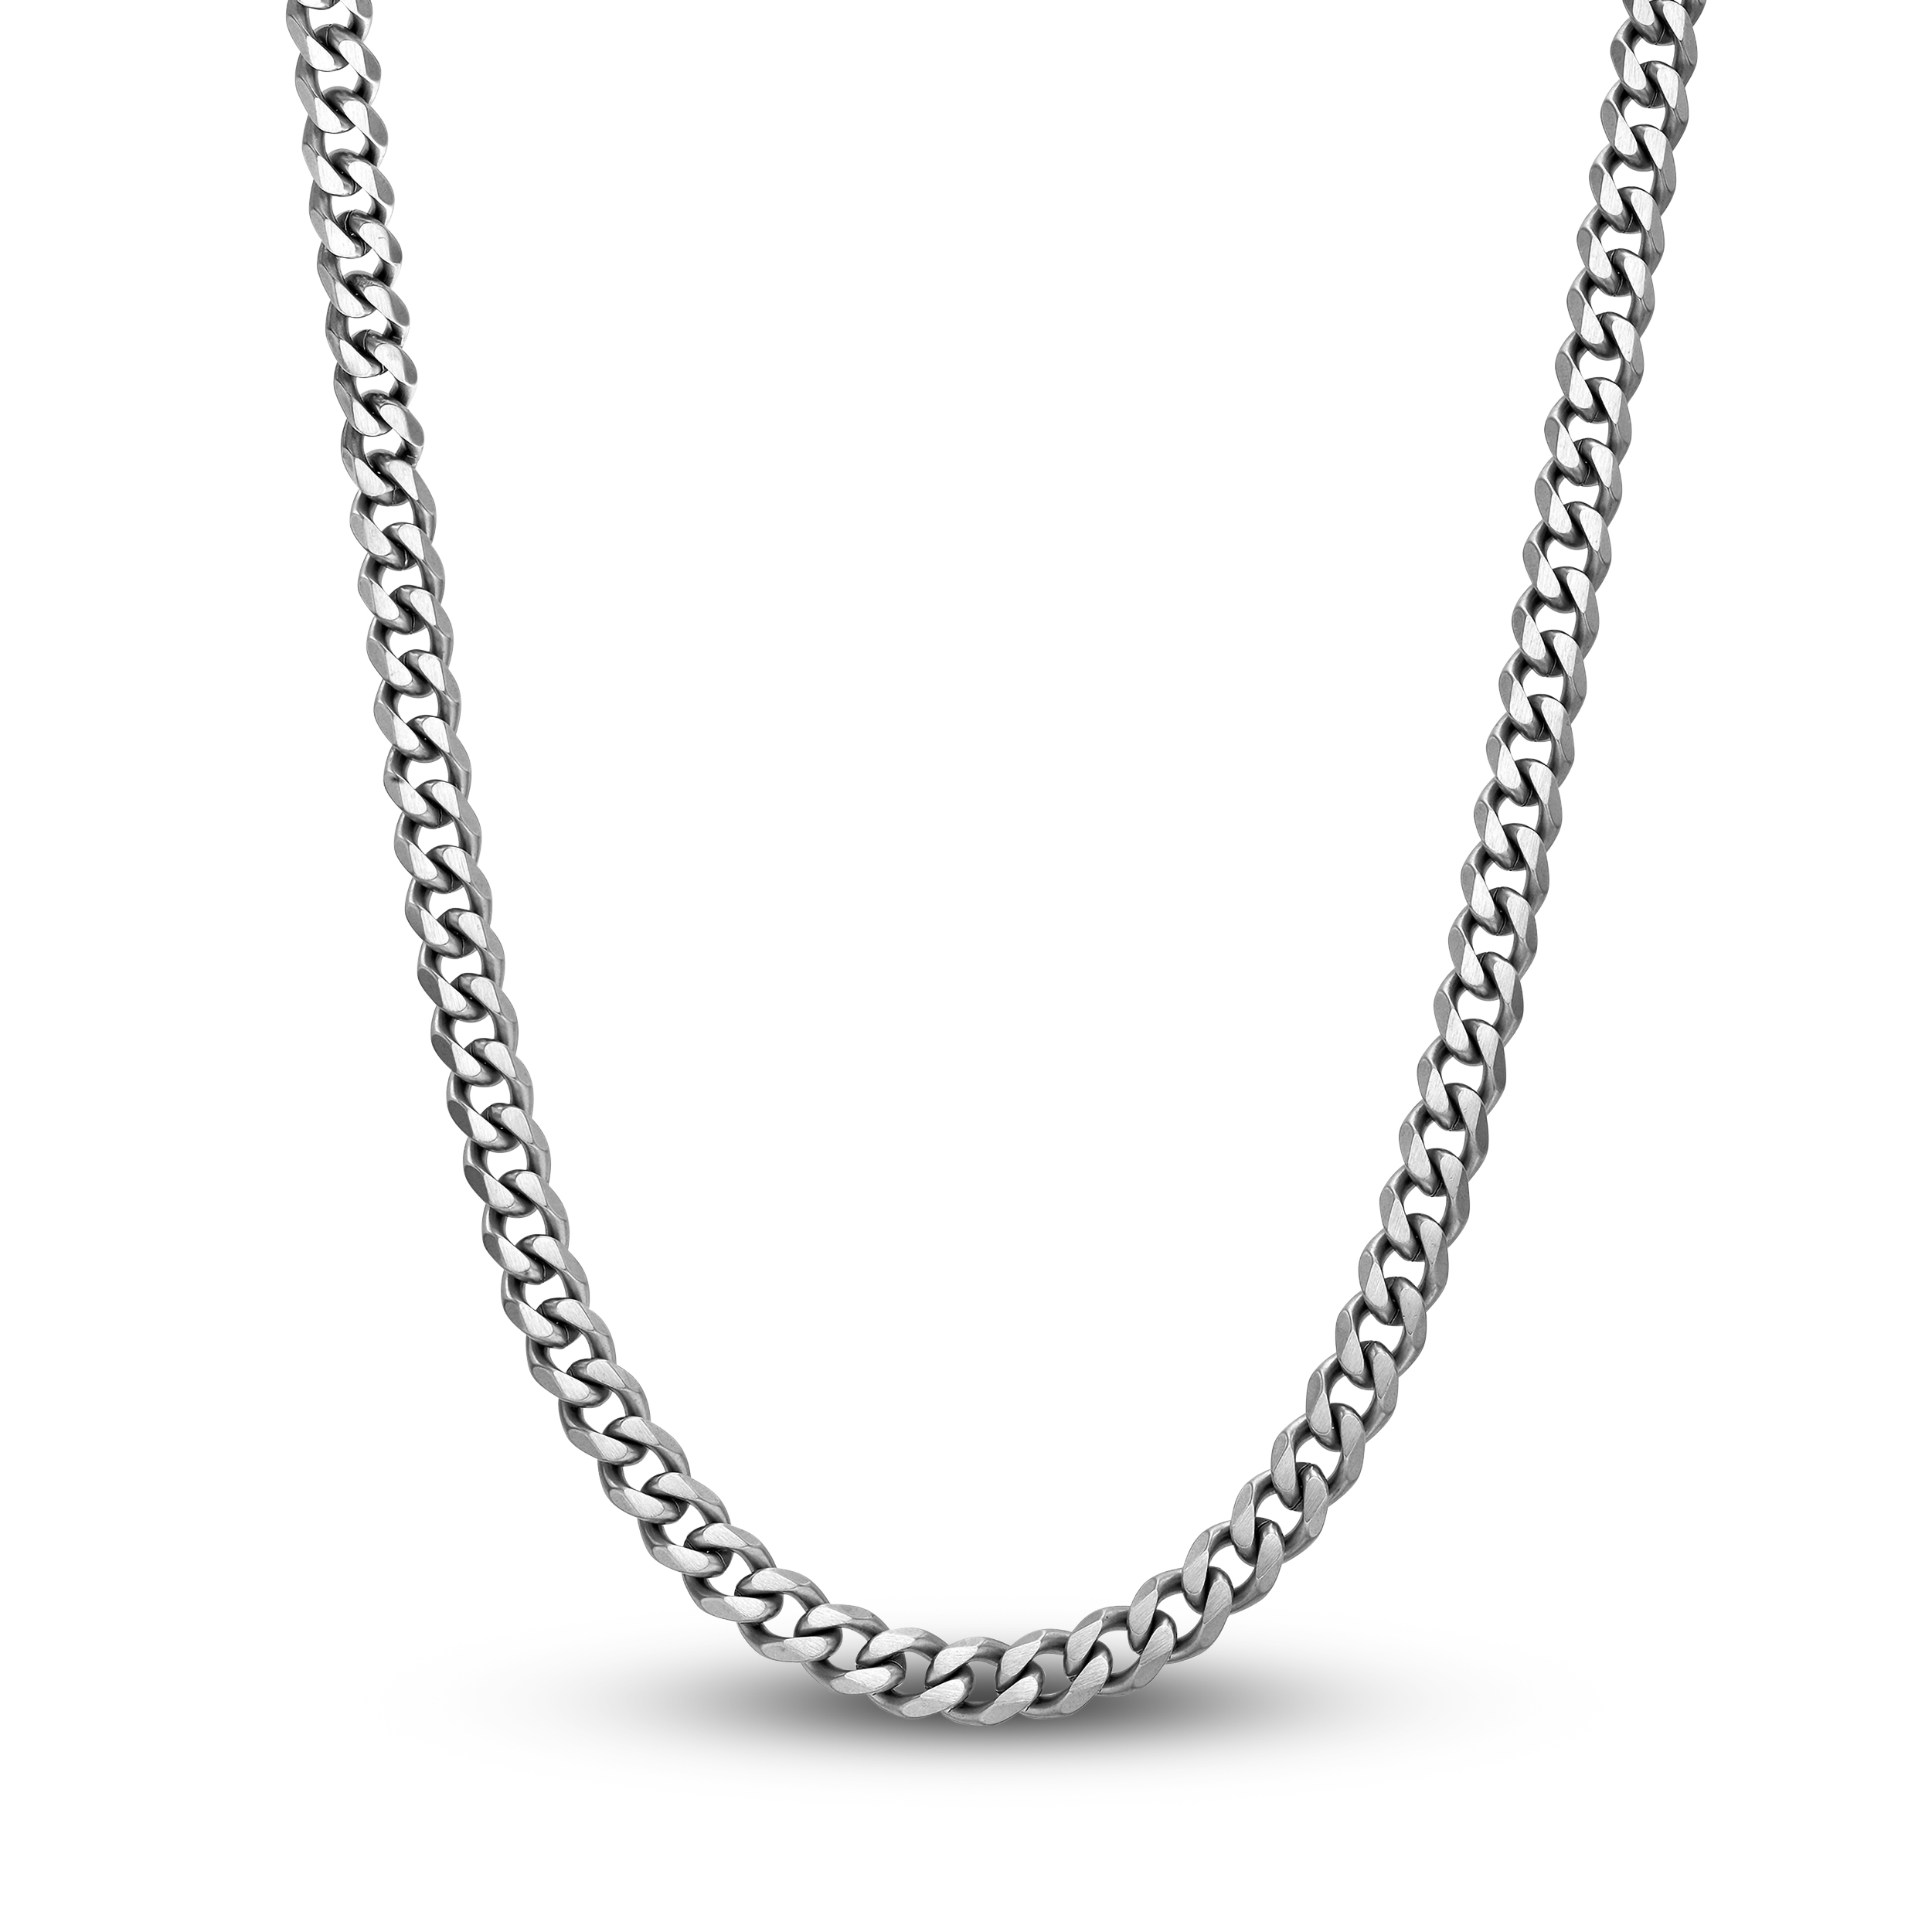 Men\'s Curb Chain Necklace Stainless Steel 8mm 24\" a8EULlr5